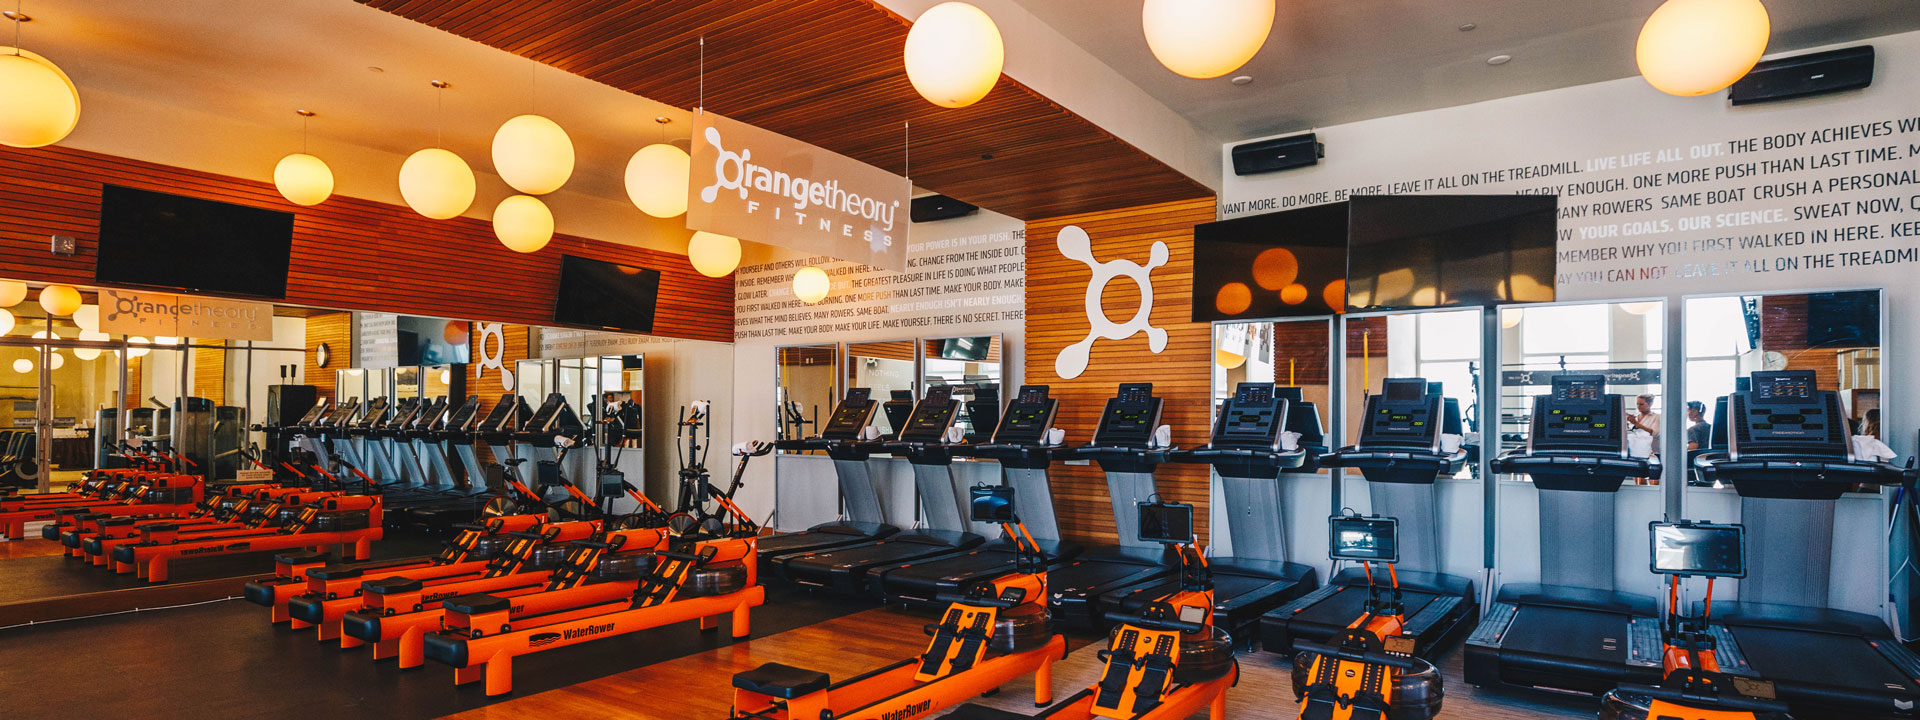 Orangetheory Fitness opens in Allentown - The Brown and White